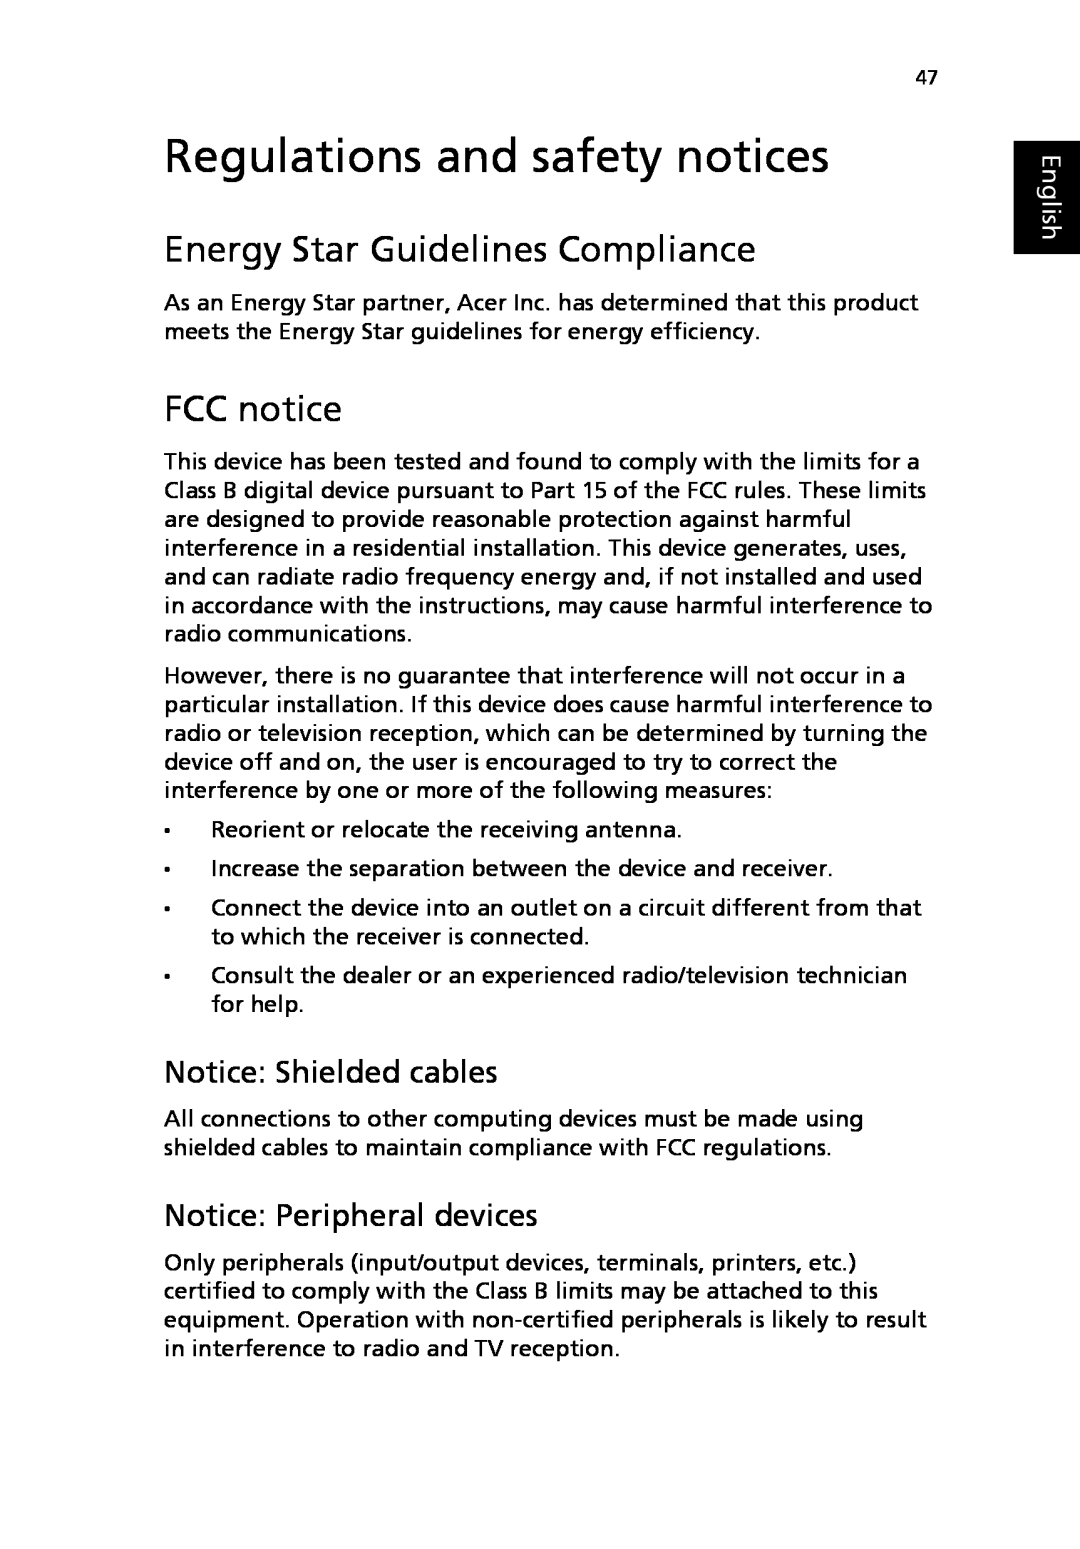 Acer 2310 Series Regulations and safety notices, Energy Star Guidelines Compliance, FCC notice, Notice Shielded cables 